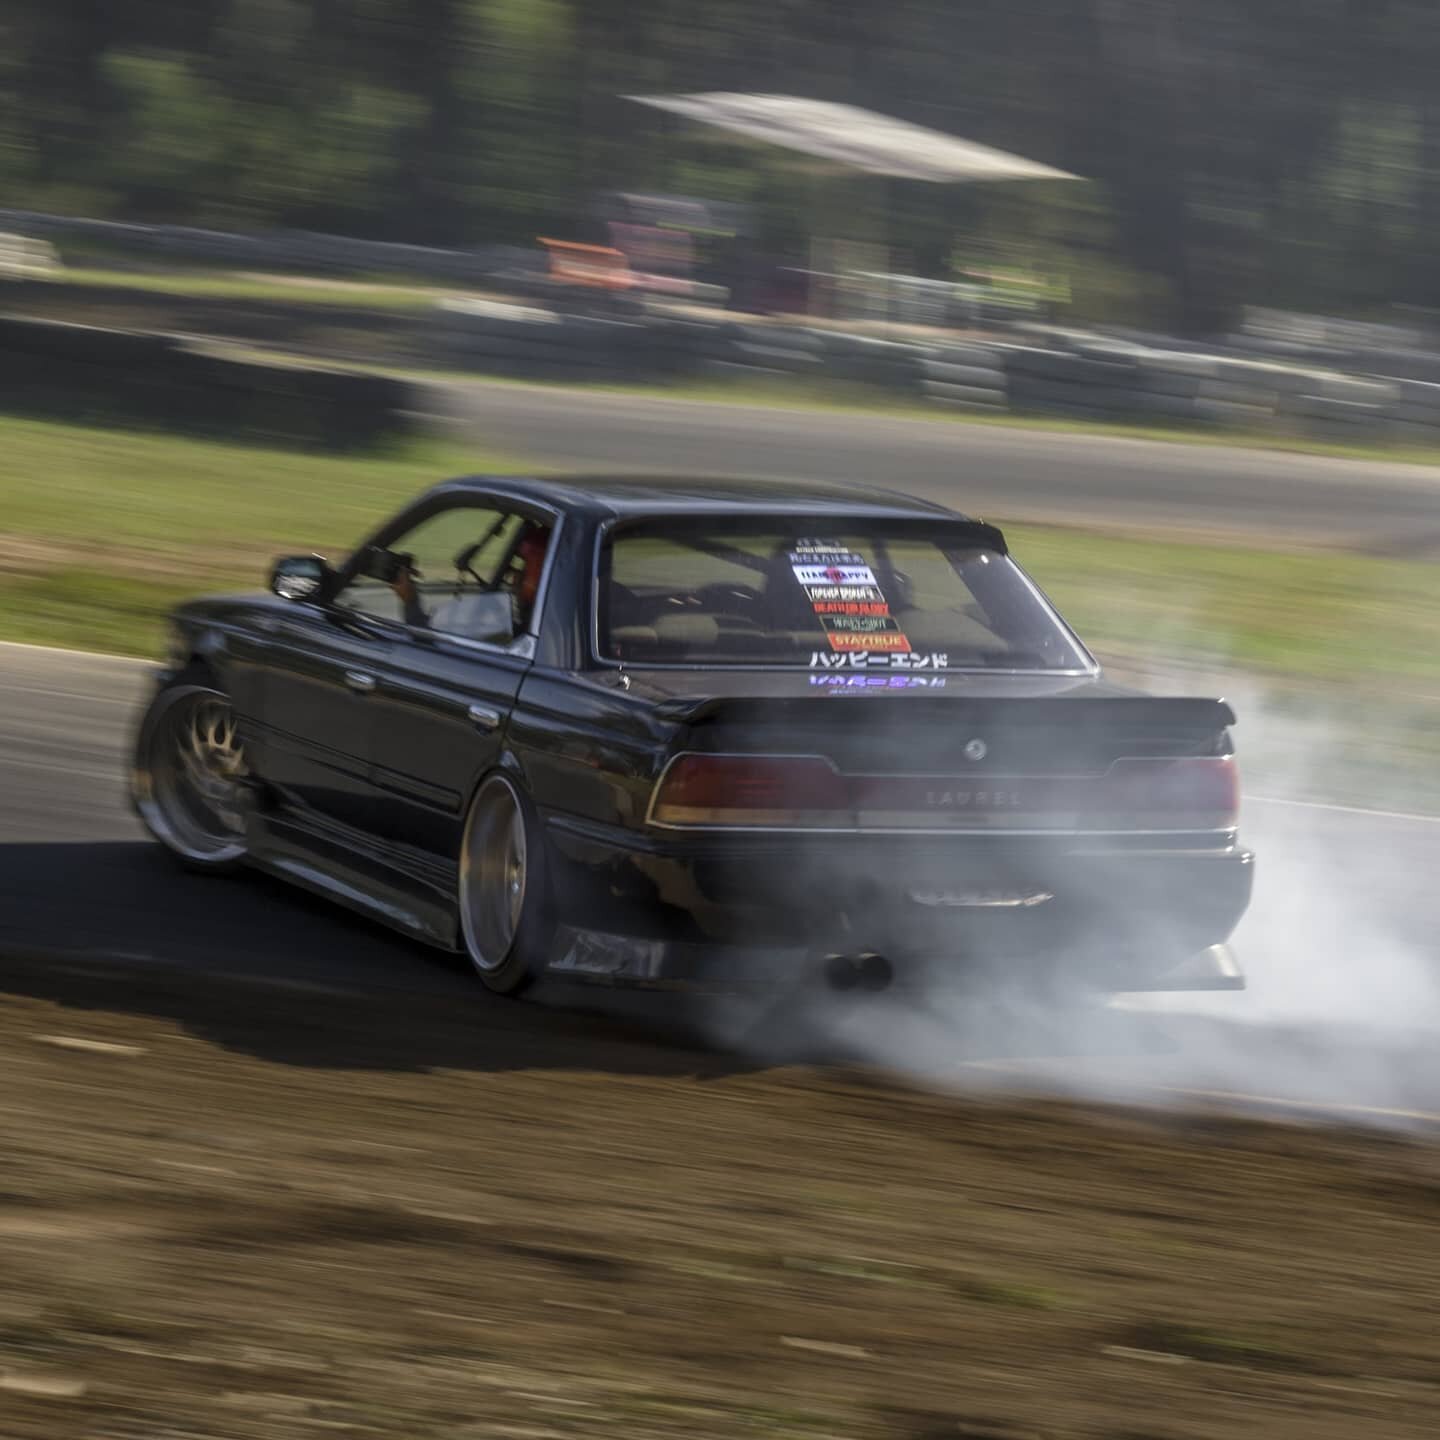 Miss going to cool tracks all year round.
.
.
.
.
.
#c33 #hc33 #c33laurel #laurel #nissan #nissanlaurel #laurelc33 #c33ローレル #laurellife #rb20 #rb20det #bringthebash4 #portmacquarie